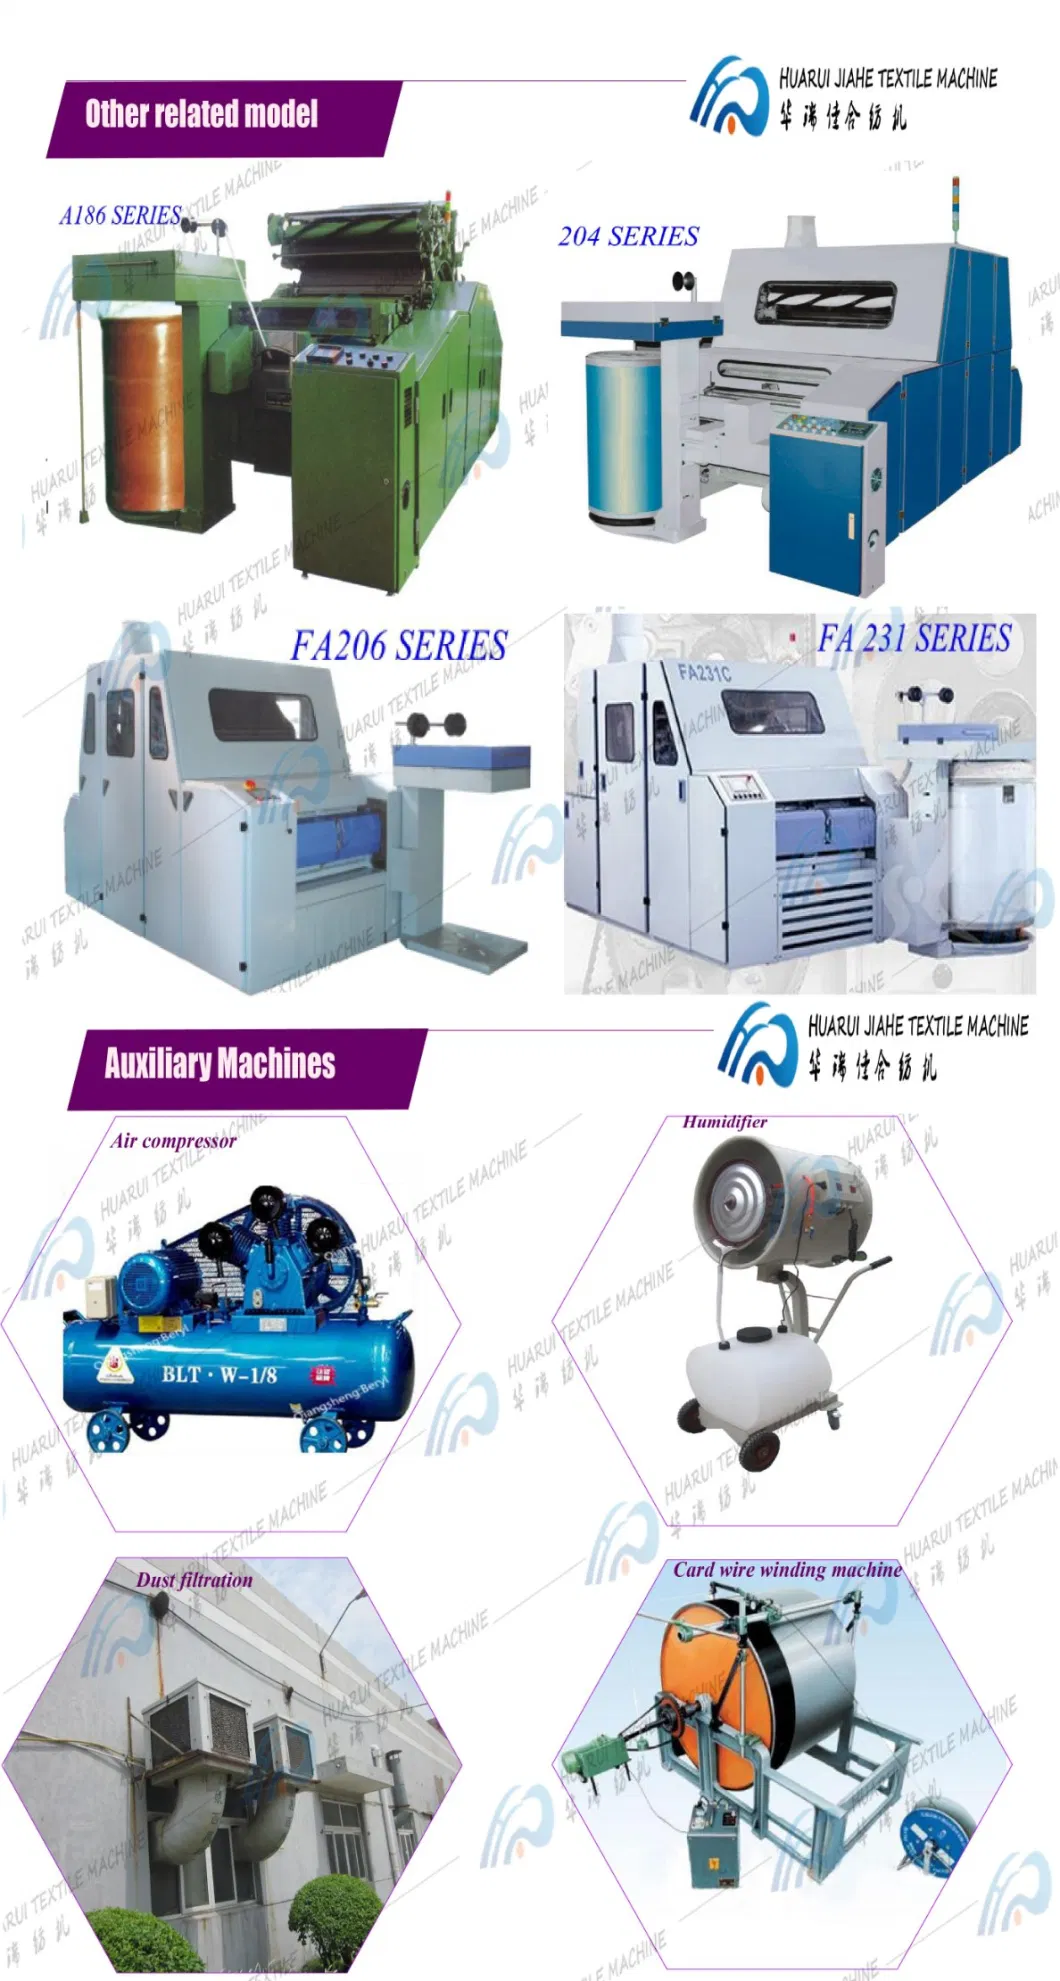 Machine Body Is Made of Fine Quality Stainless Steel. Printing and Dyeing Dyeing Paddle Custom Laboratory Sample Dyeing Machine